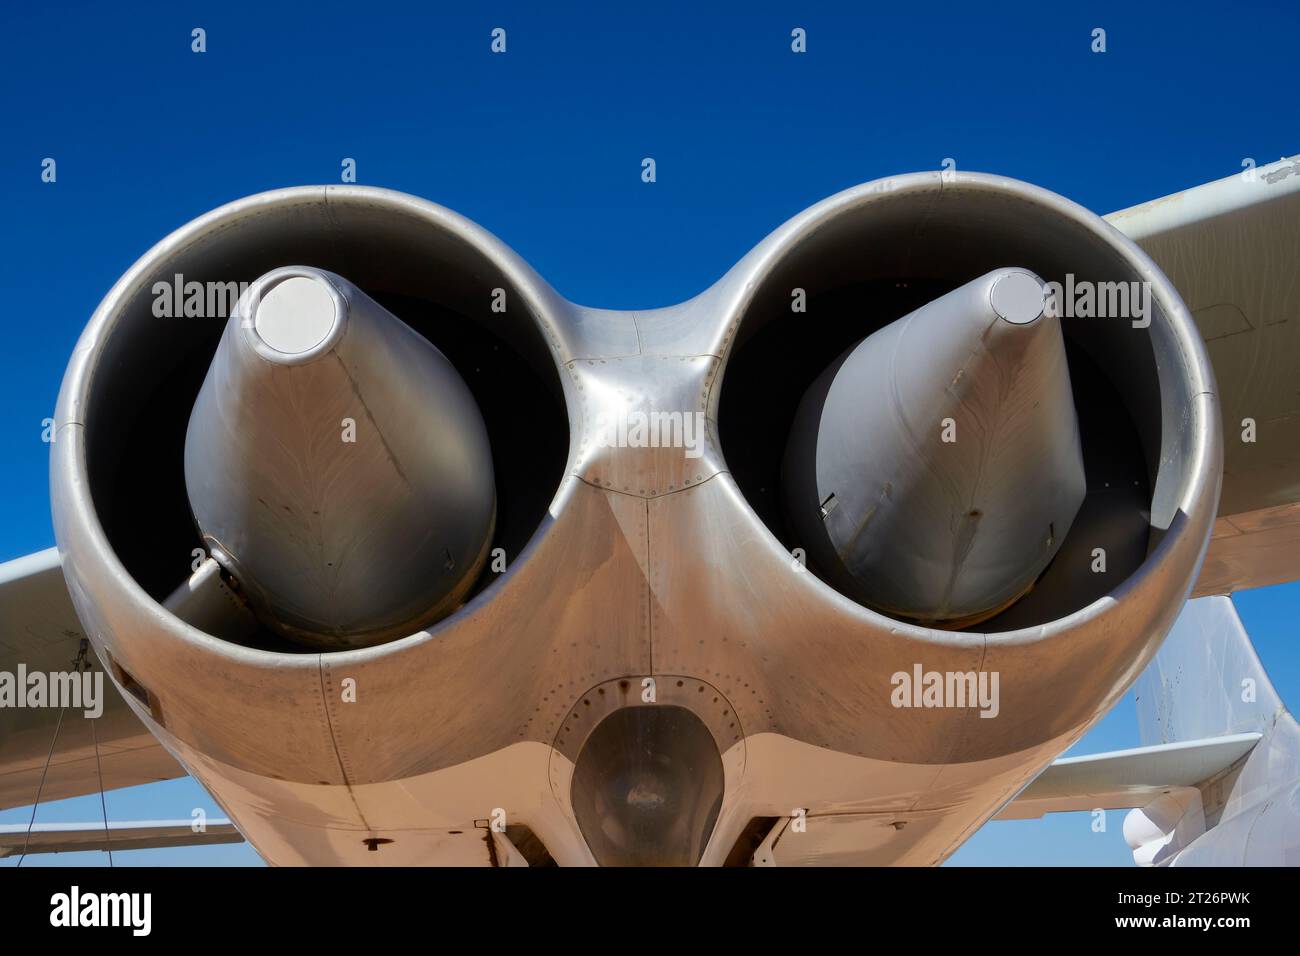 A Close Up View Of The Intakes To The General Electric J47 Jet Engines Powering The Boeing B-47 Stratojet Long Range Strategic Bomber Stock Photo